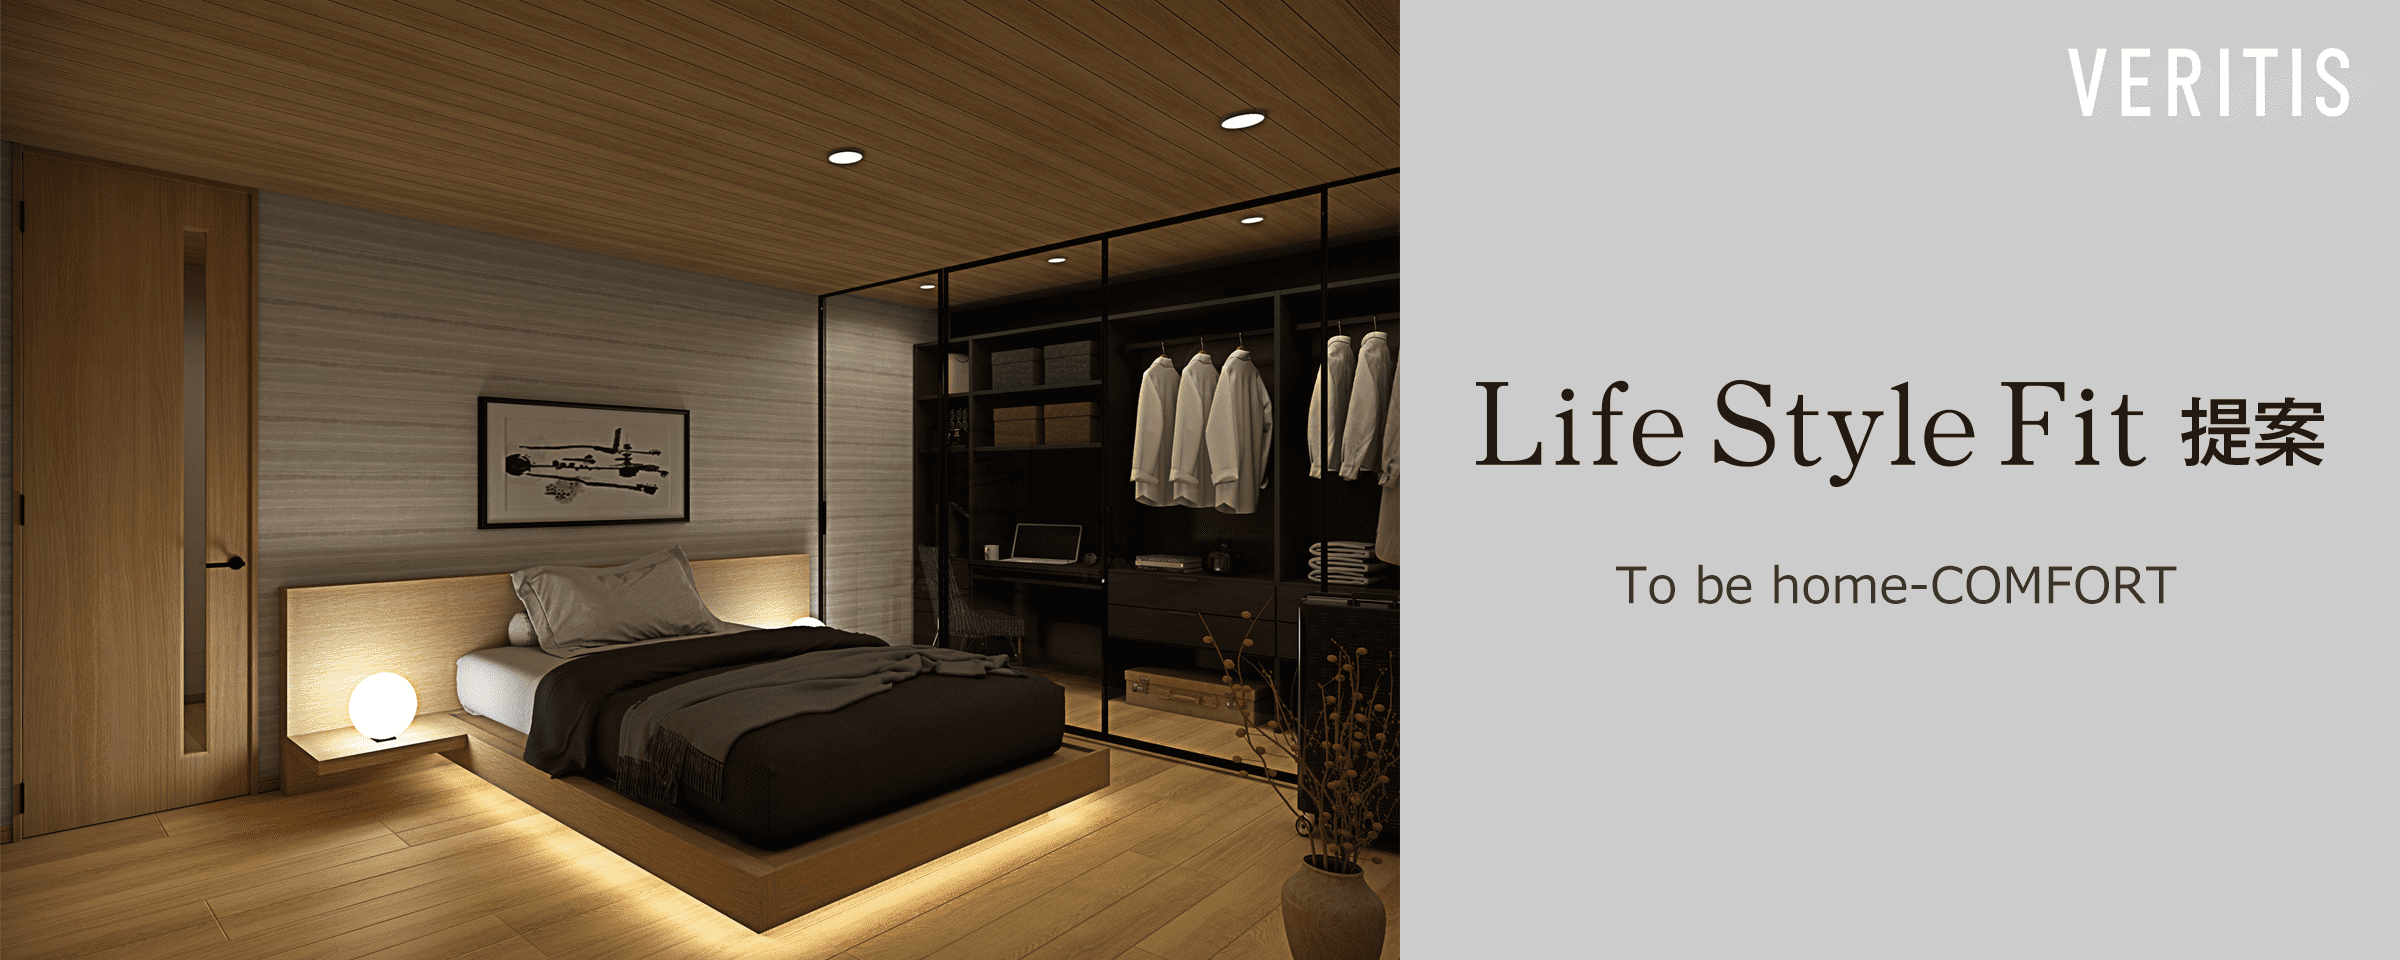 Life style Fit 提案 To be home-COMFORT